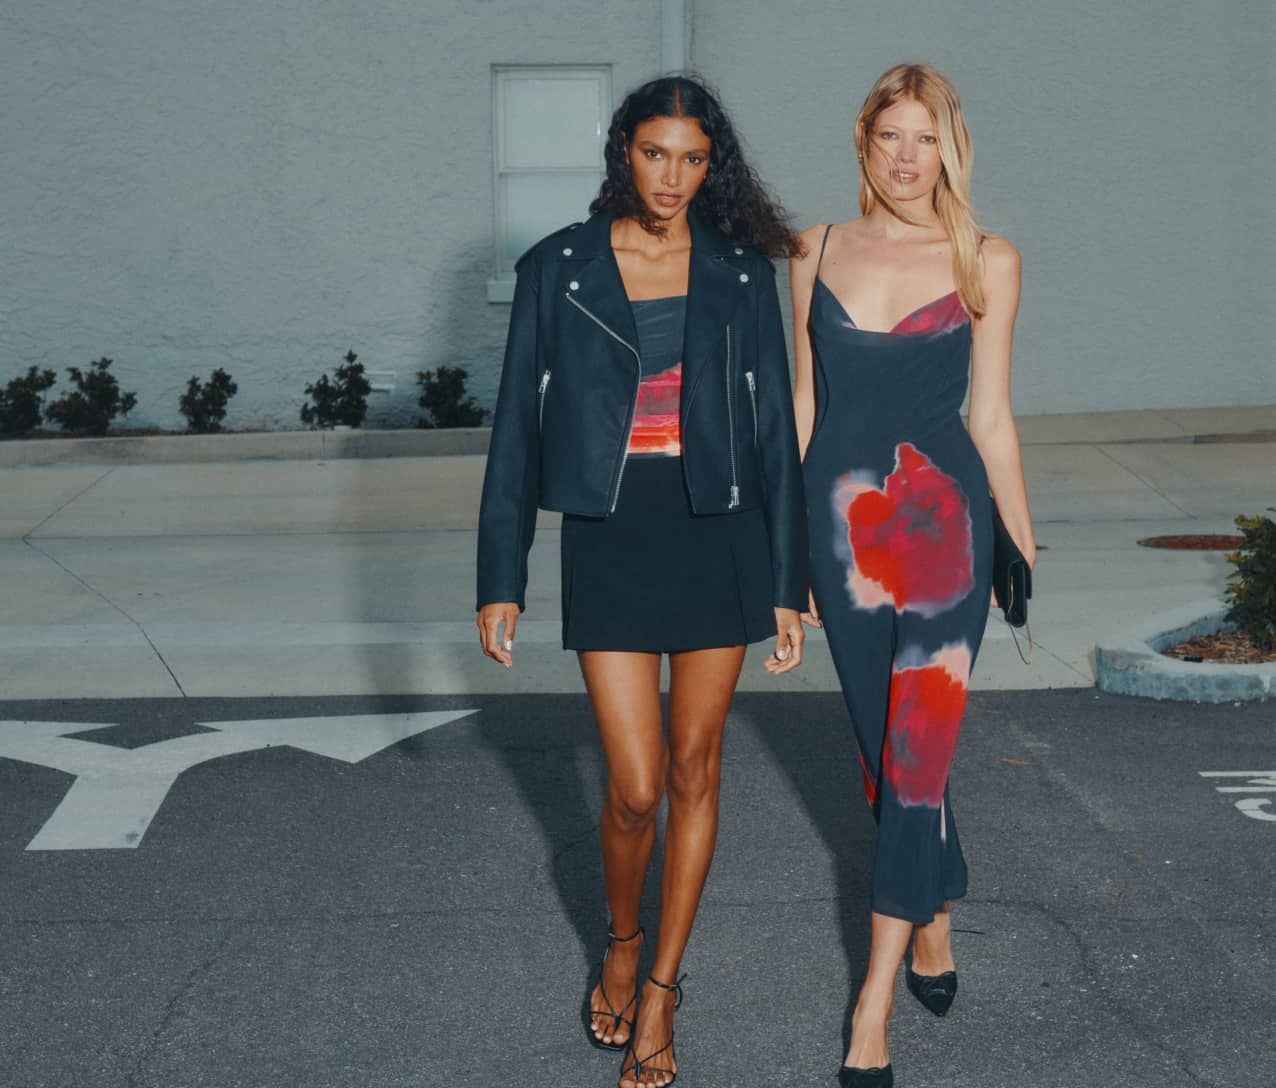 Model to the left is wearing a black faux-leather biker jacket, floral mesh top, and a black mini skort. Model to the right is wearing a black floral cowl neck maxi dress.